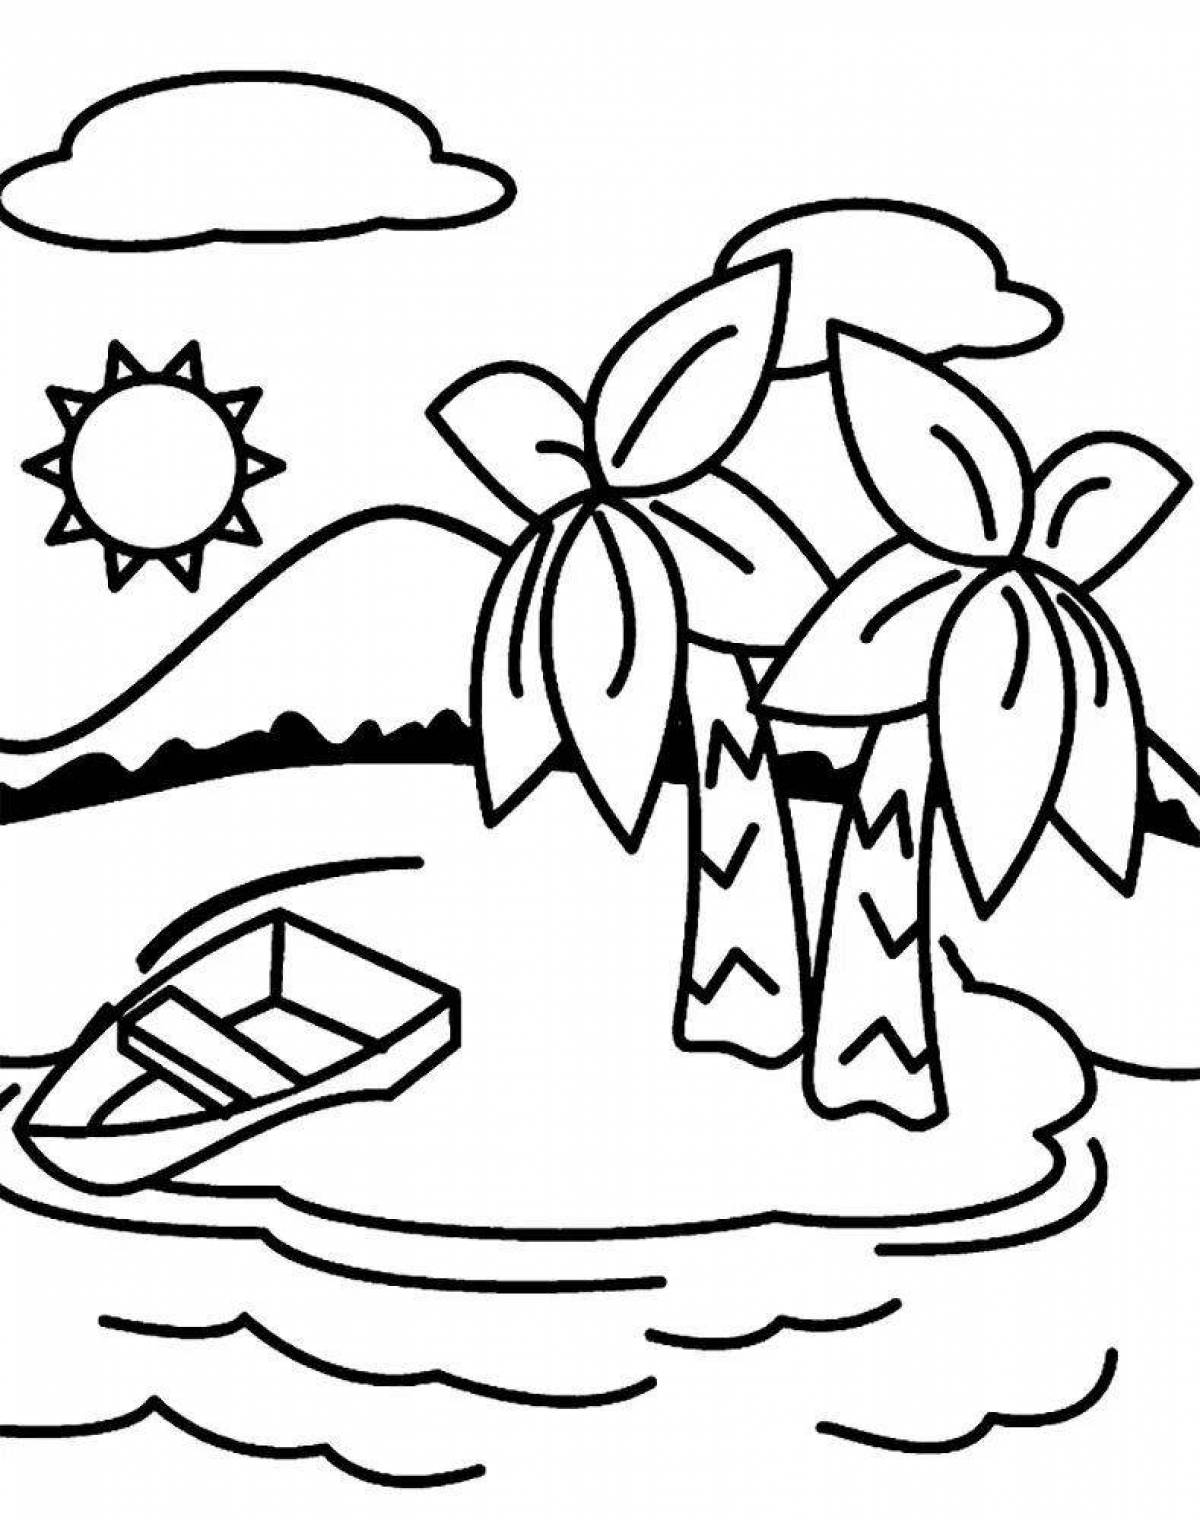 Rough island coloring book for kids